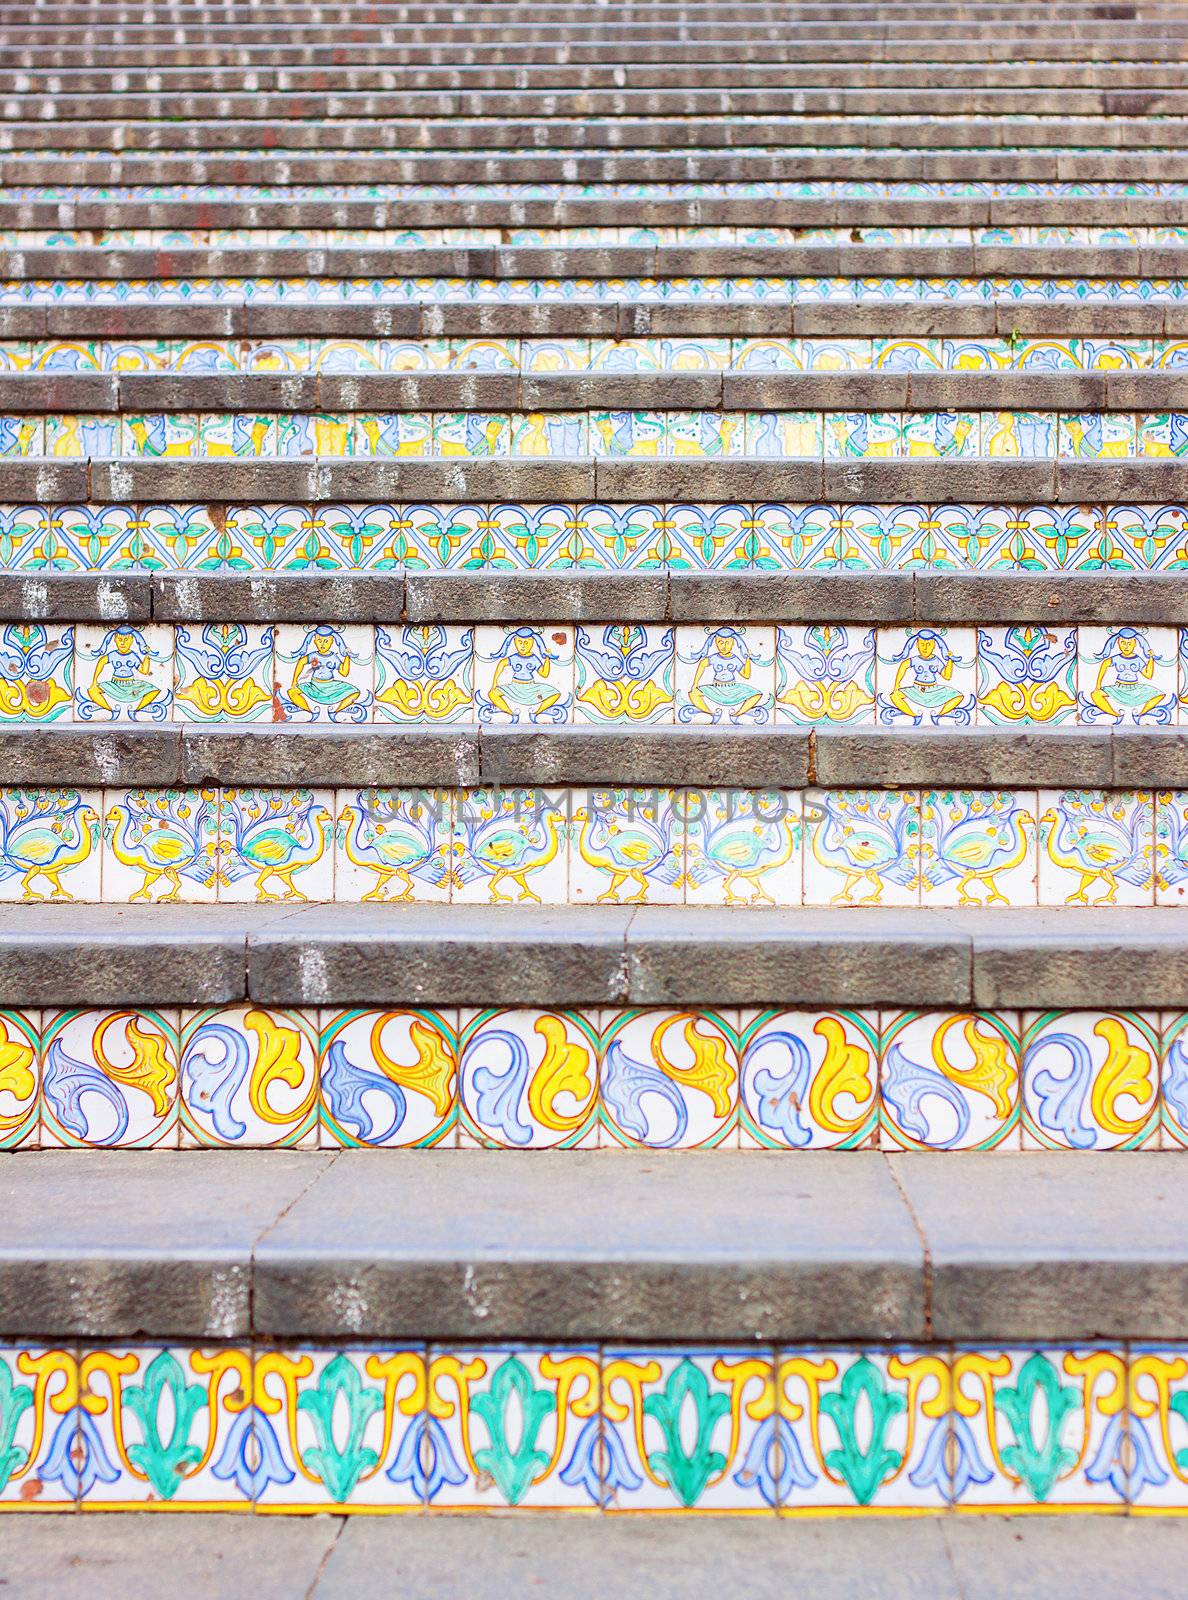 Ceramic steps in Caltagirone, Sicily, Italy by annems